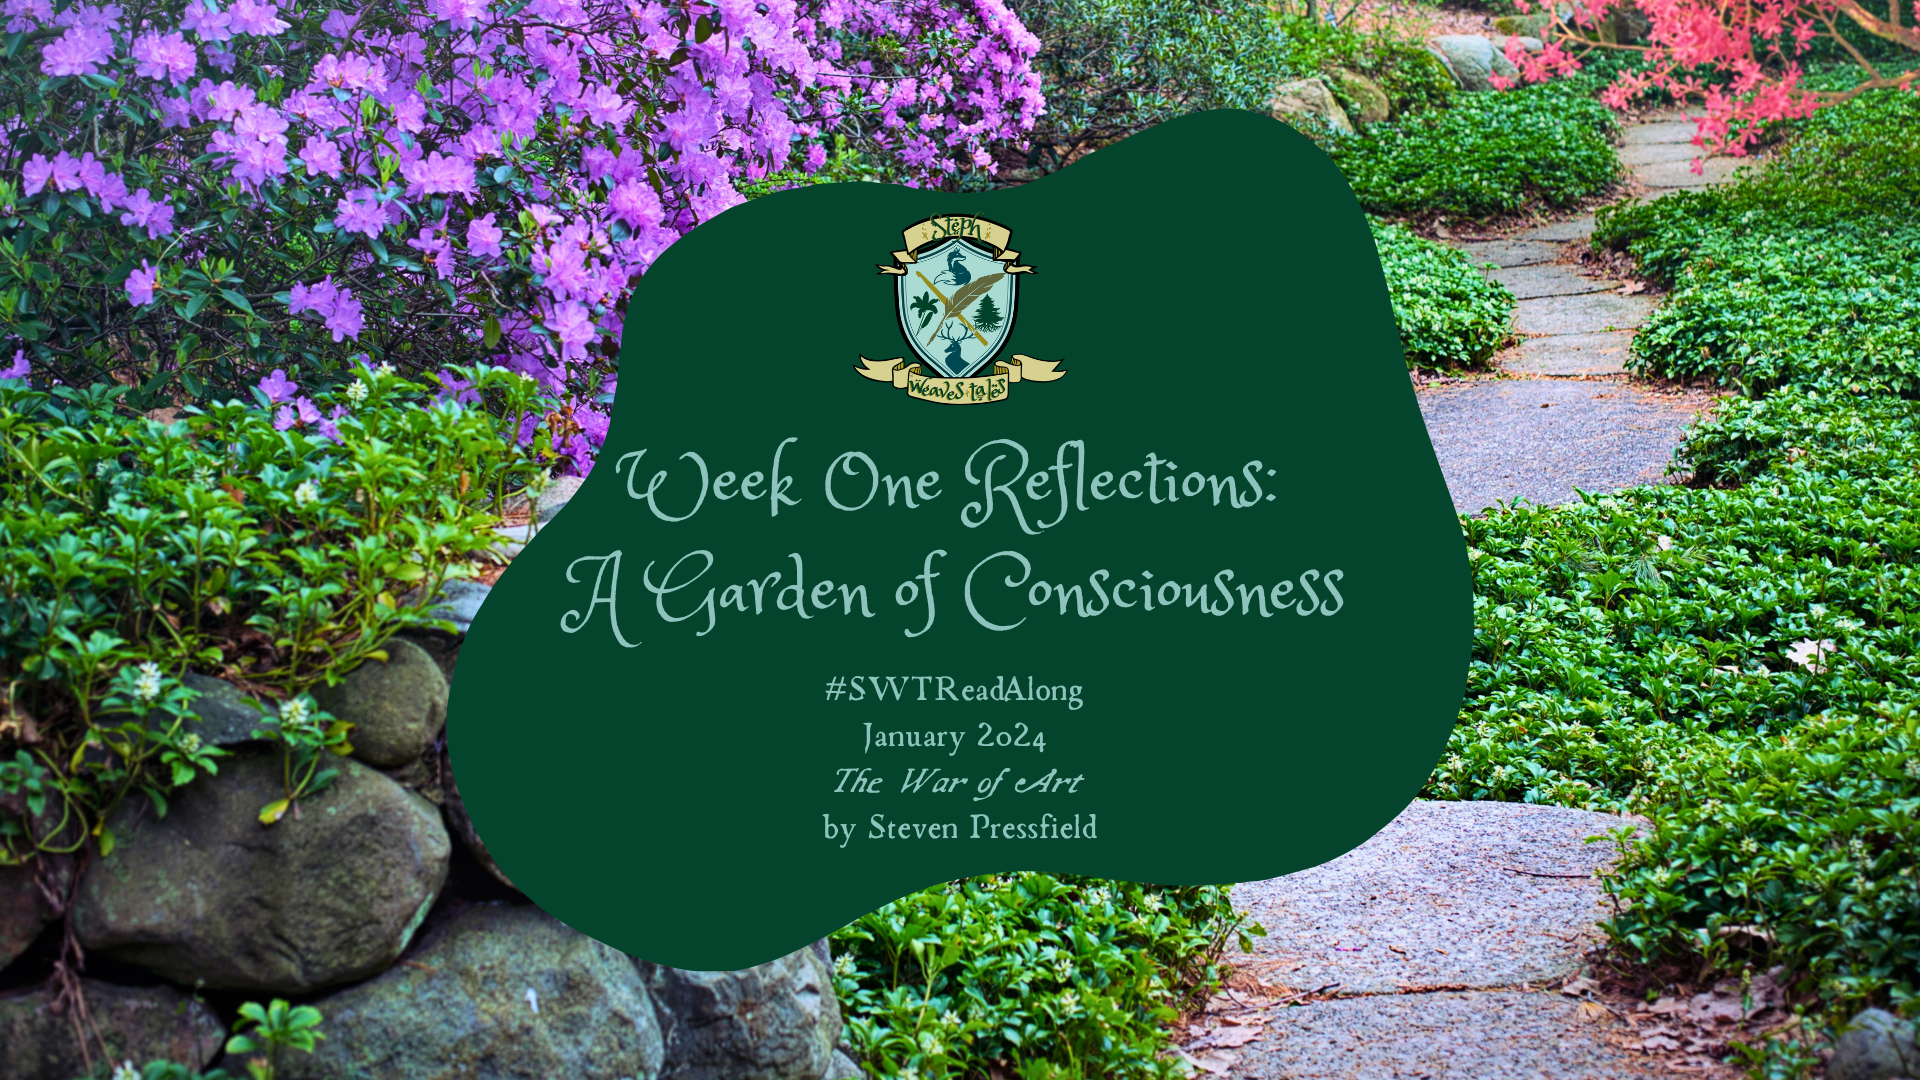 Featured Image with a garden in the background. Text on the image reads: Week One Reflections: A Garden of Consciousness #SWTReadAlong January 2024 The War of Art by Steven Pressfield